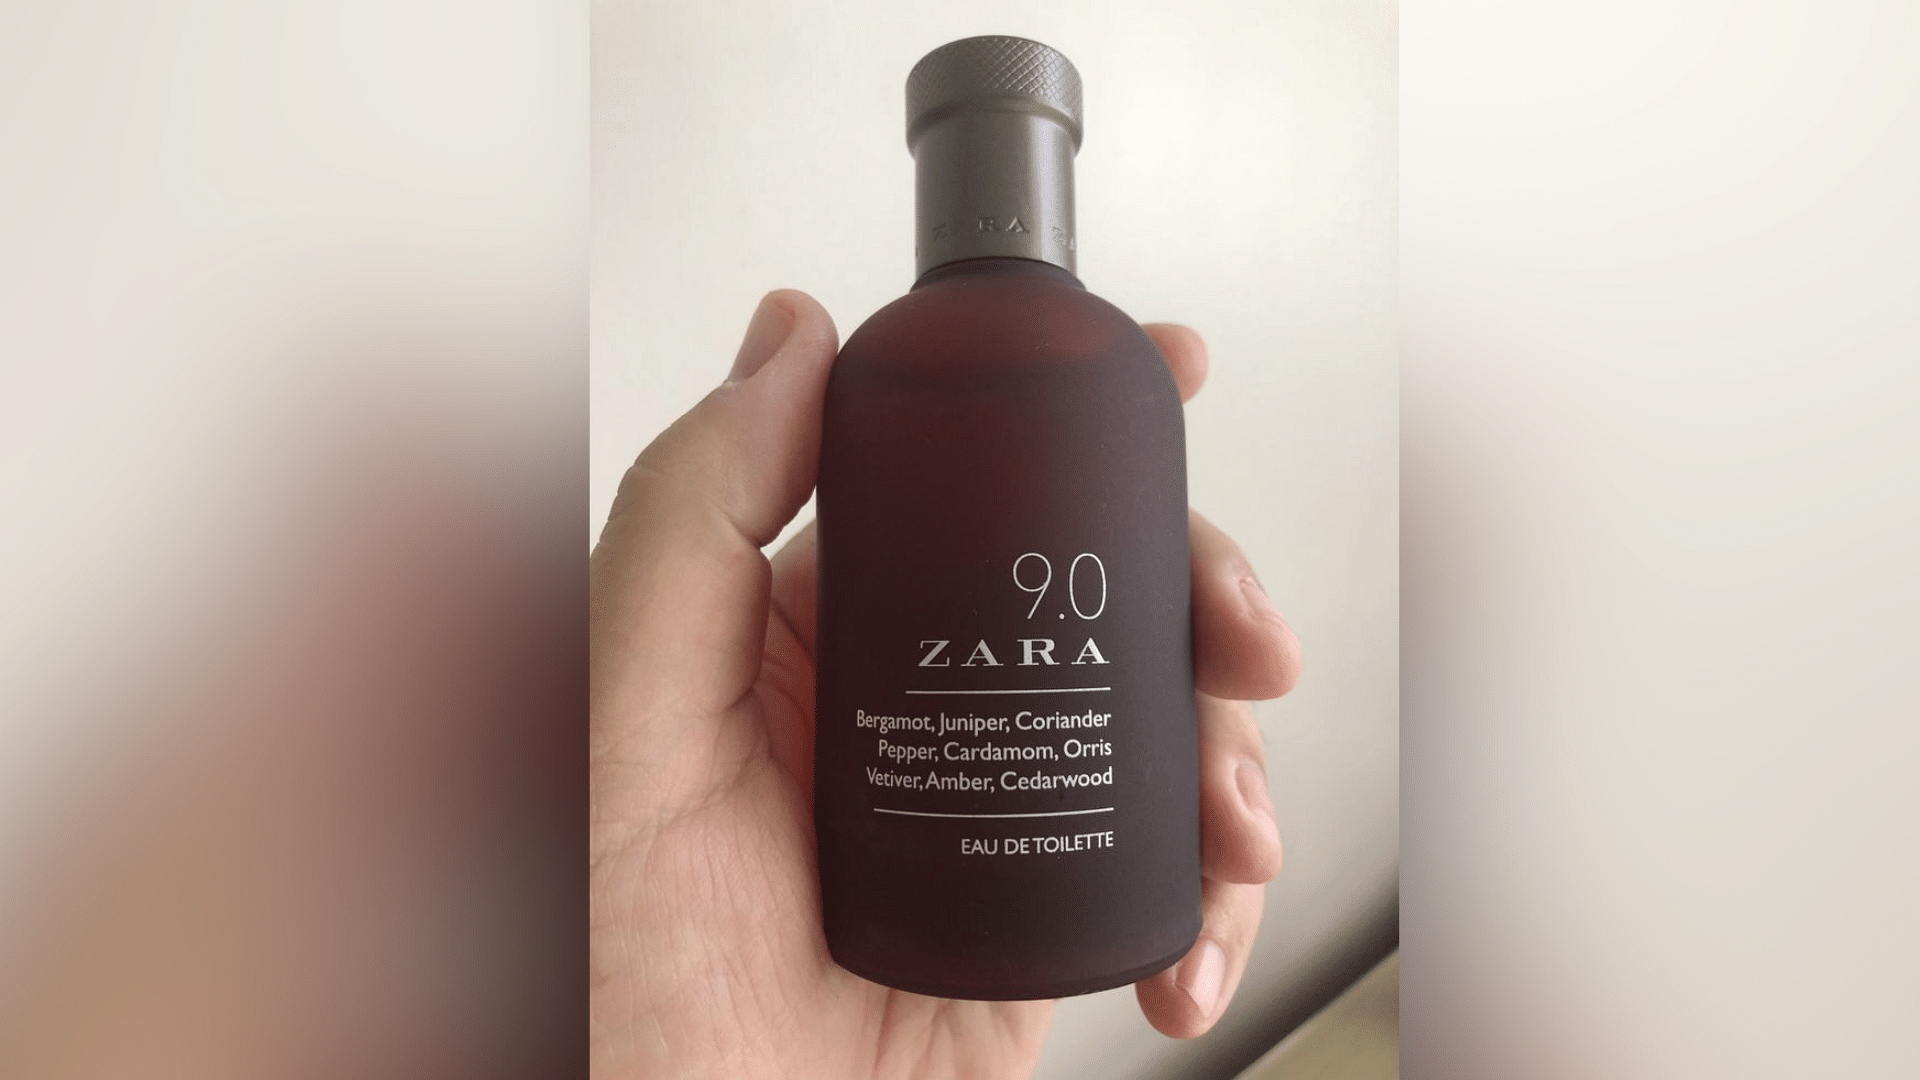 <div class="paragraphs"><p>Internet reacts to Zara perfume with notes of coriander, pepper, and cardamom</p></div>